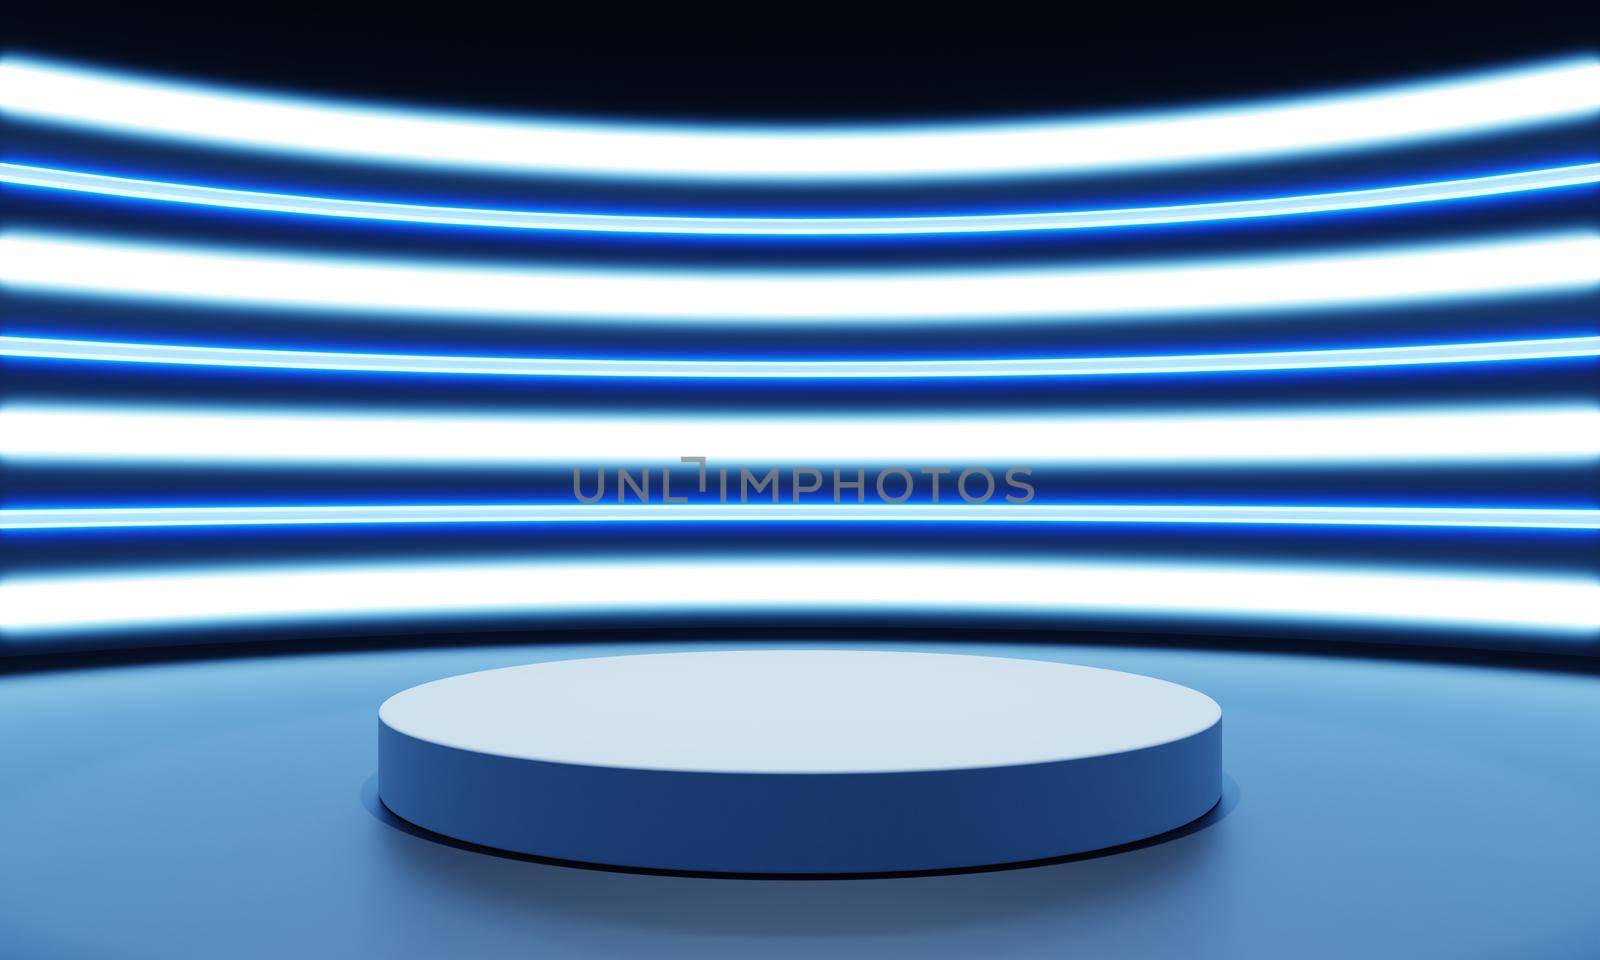 Cyberpunk sci-fi product podium showcase with blue and white neon light background. Technology and object concept. 3D illustration rendering by MiniStocker